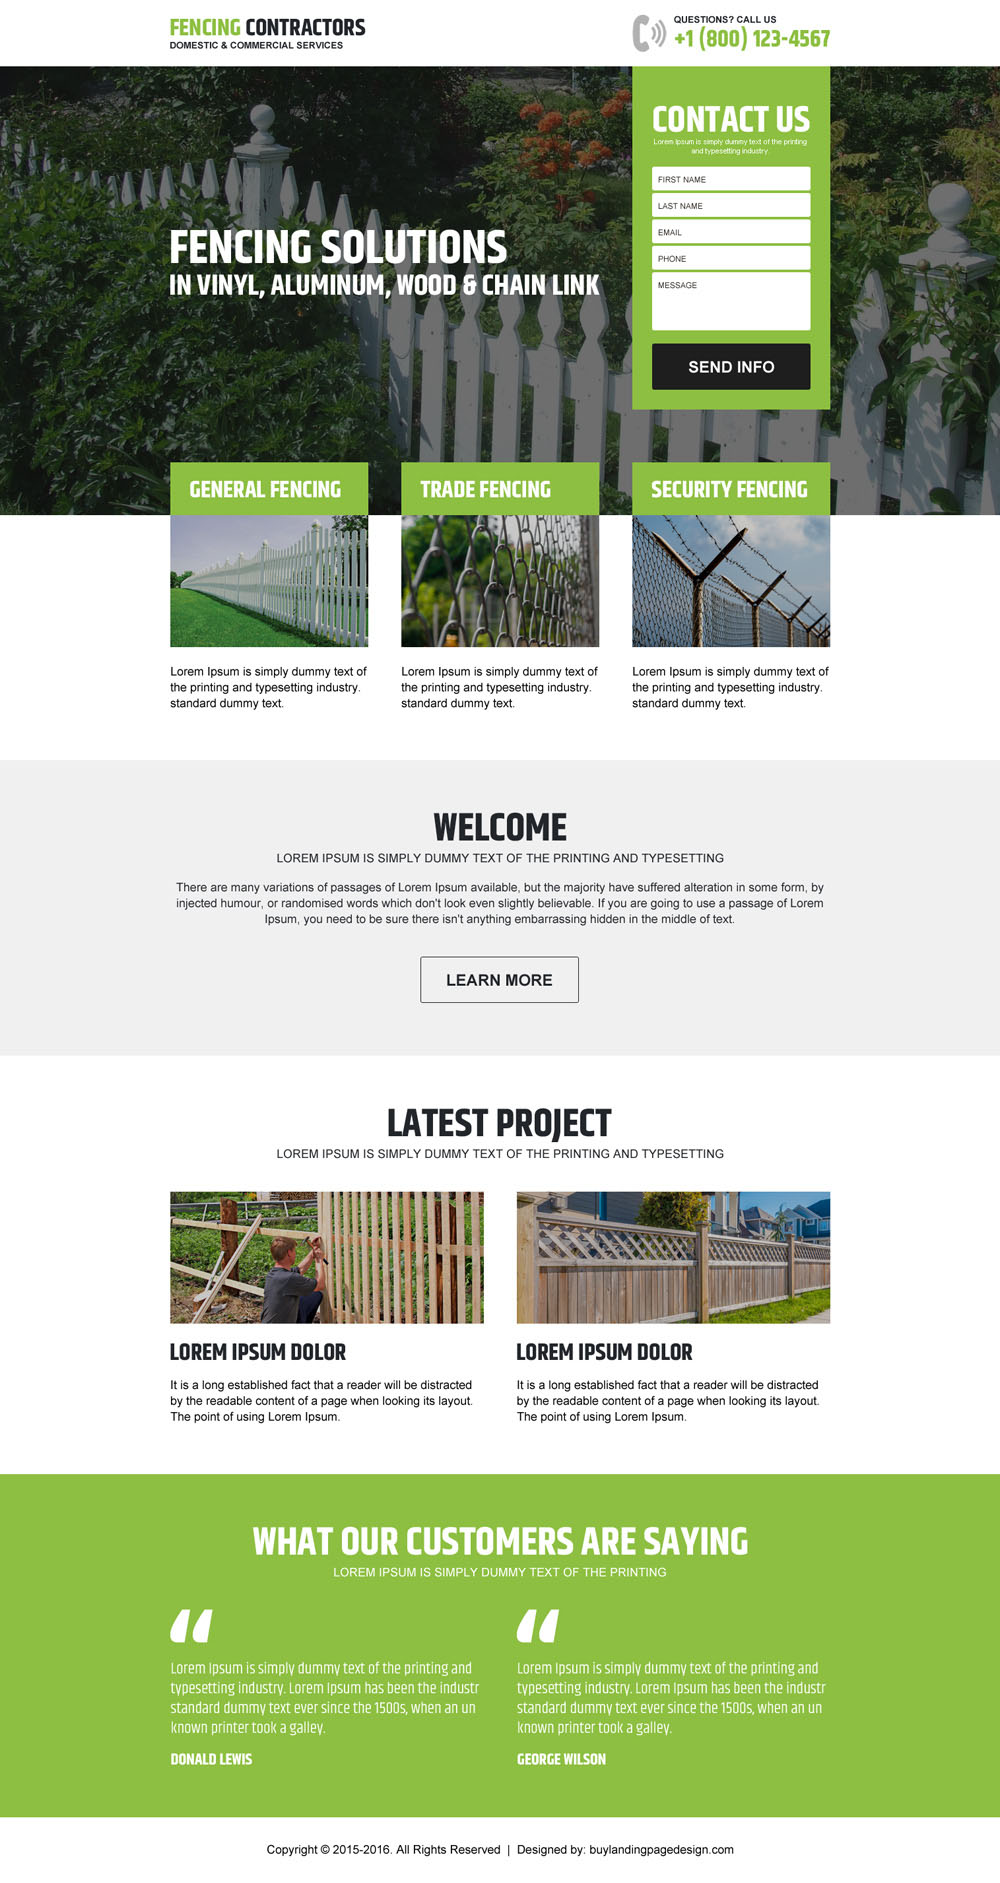 fencing-contractors-for-domestic-and-commercial-service-lead-gen-landing-page-001